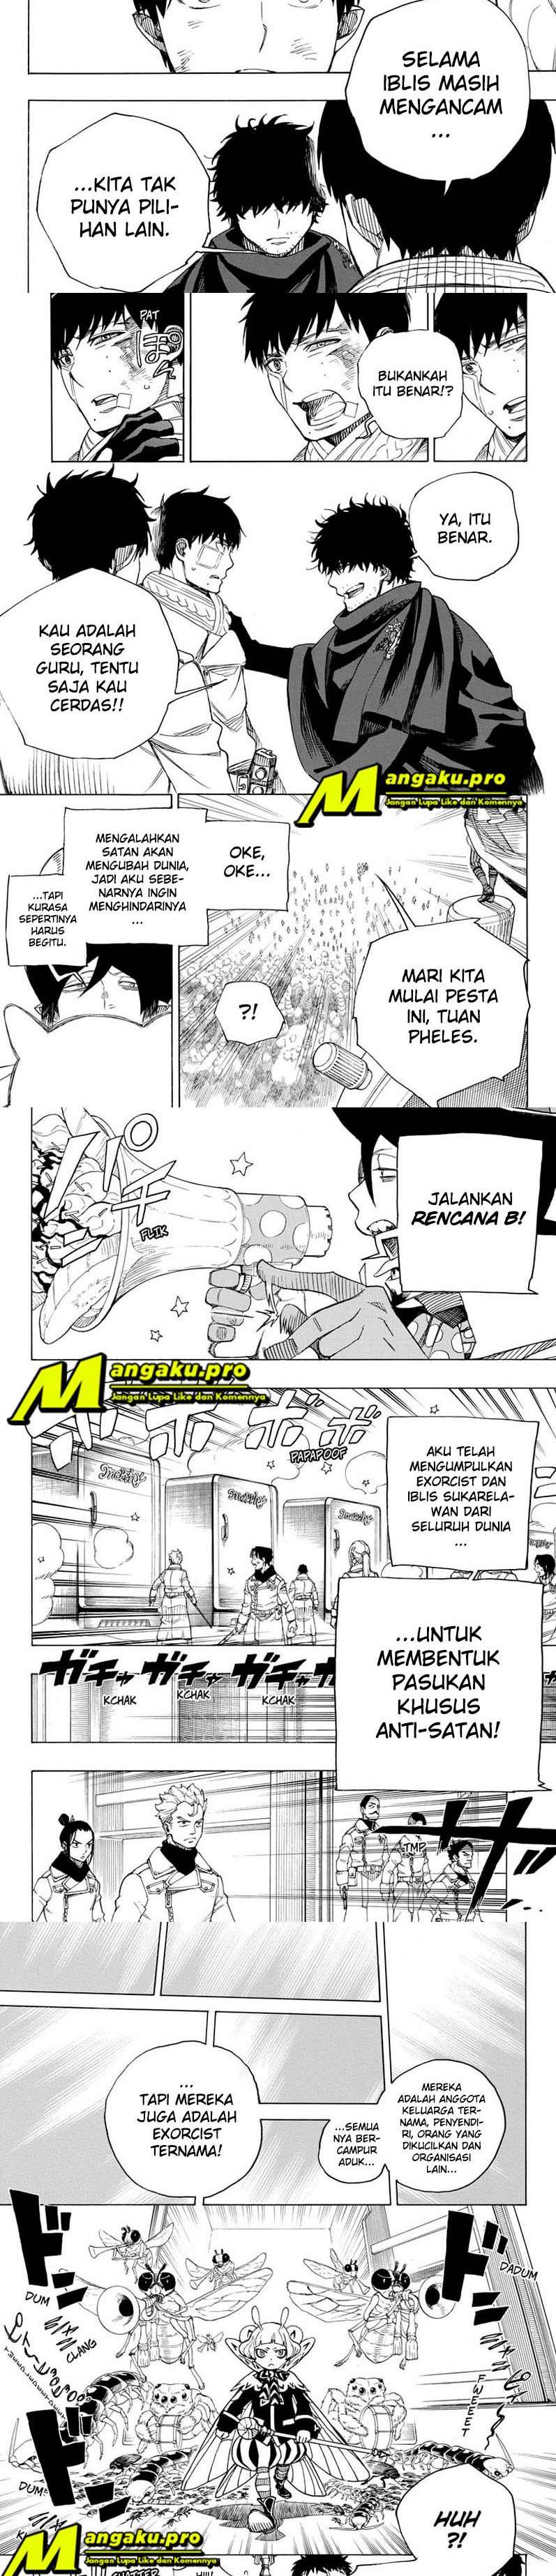 Ao no Exorcist Chapter 130.2 3